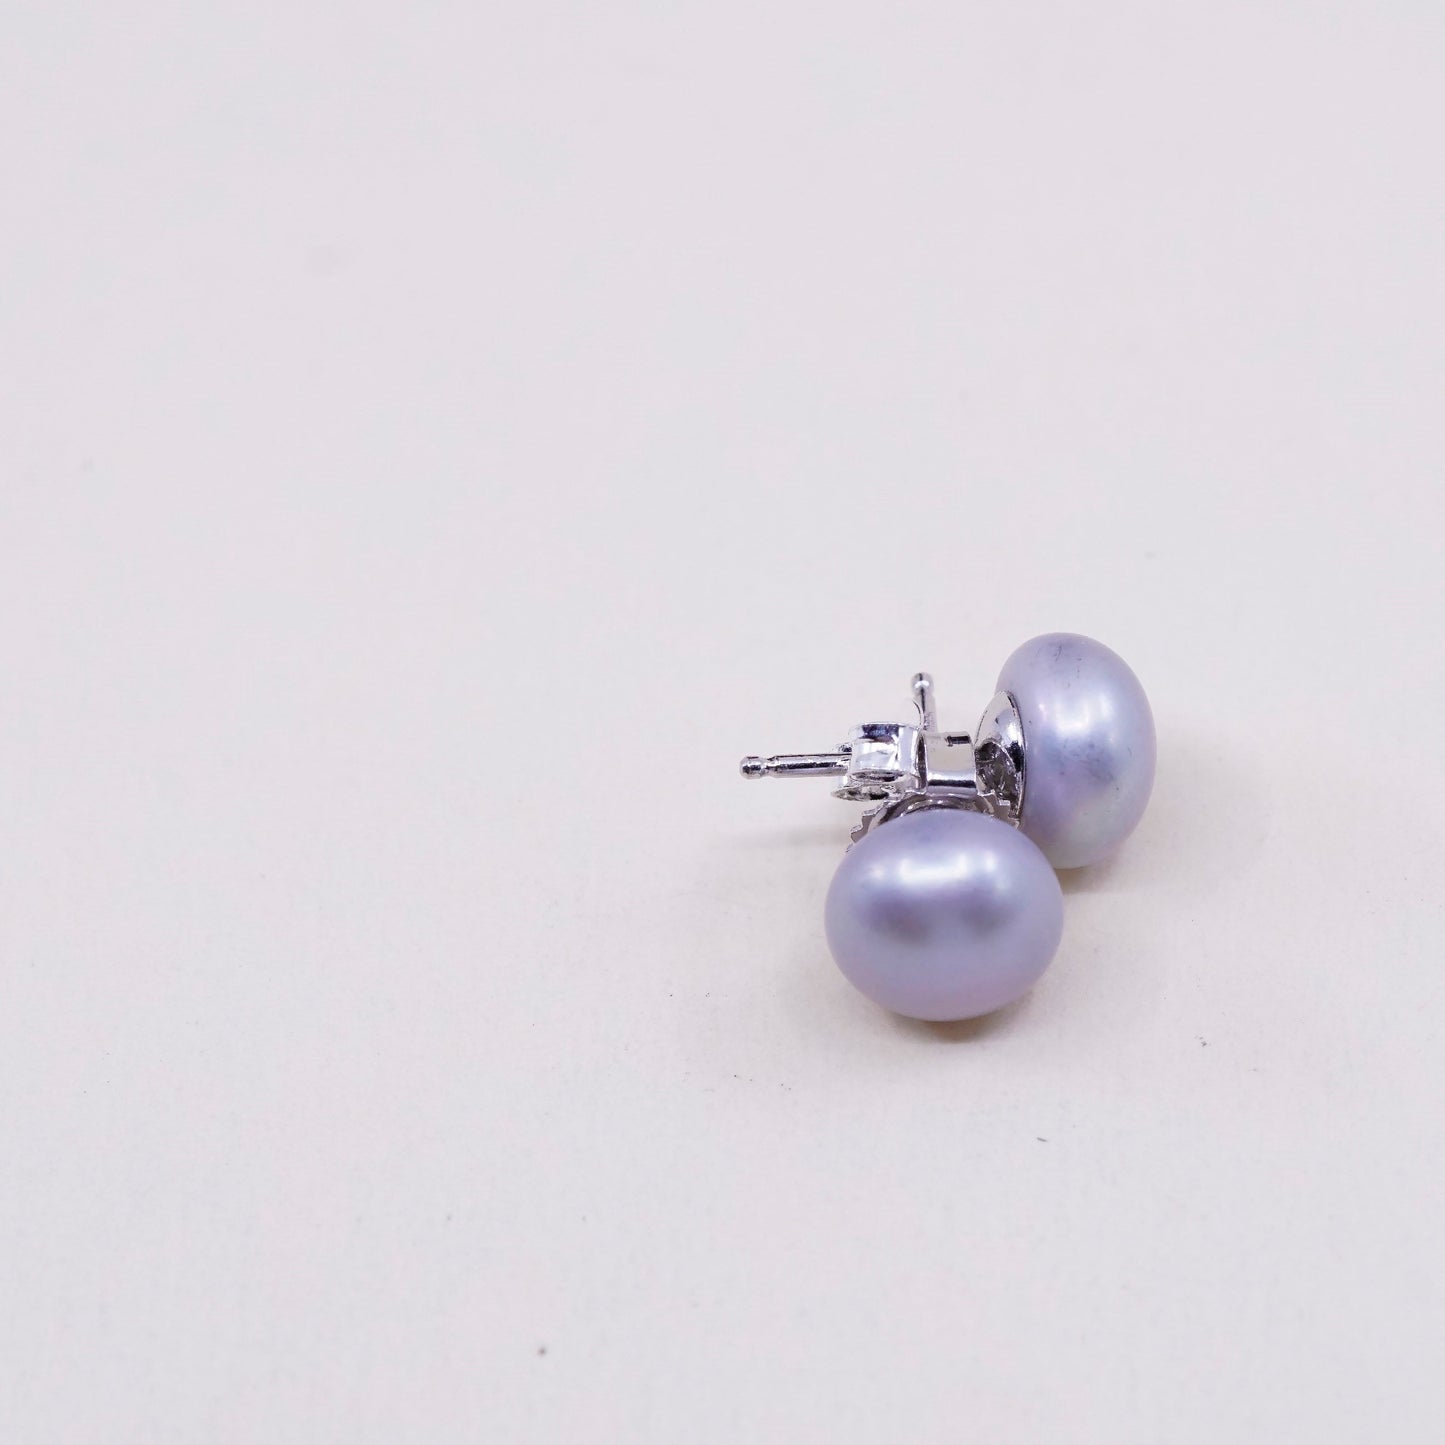 Vintage sterling silver earrings, 925 studs with gray pearl